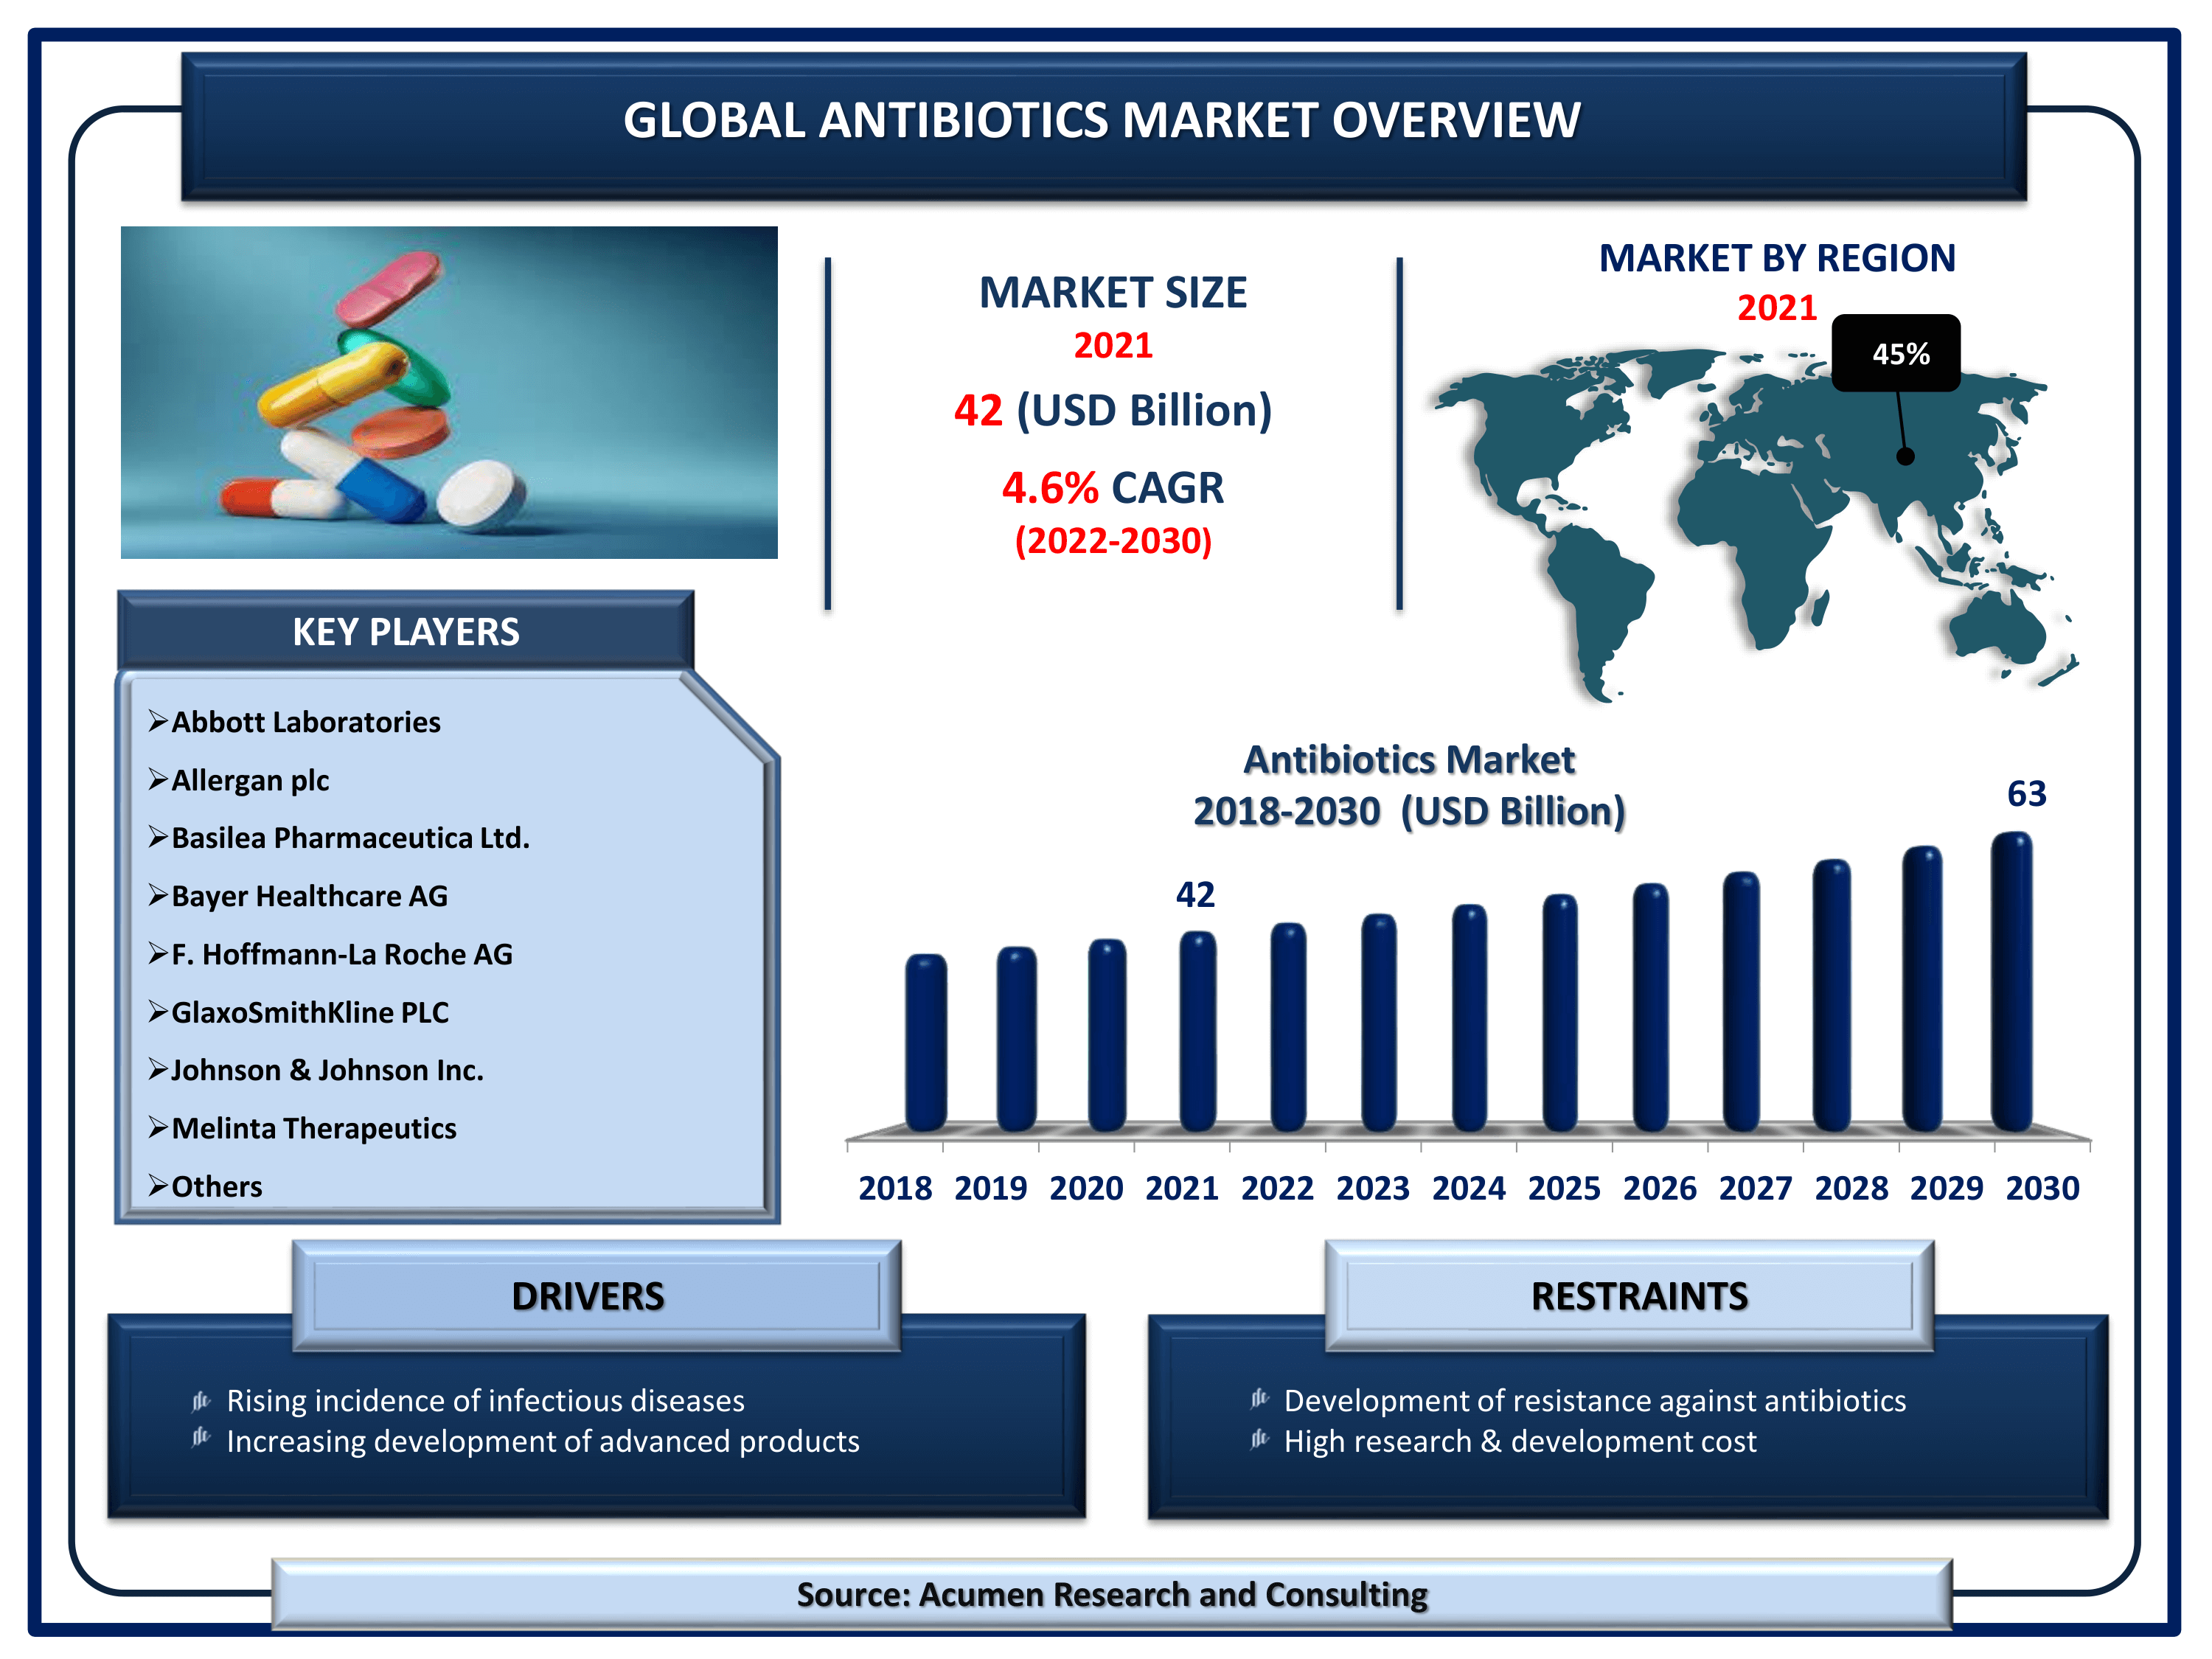 Global antibiotics market revenue is estimated to reach USD 63 Billion by 2030 with a CAGR of 4.6% from 2022 to 2030